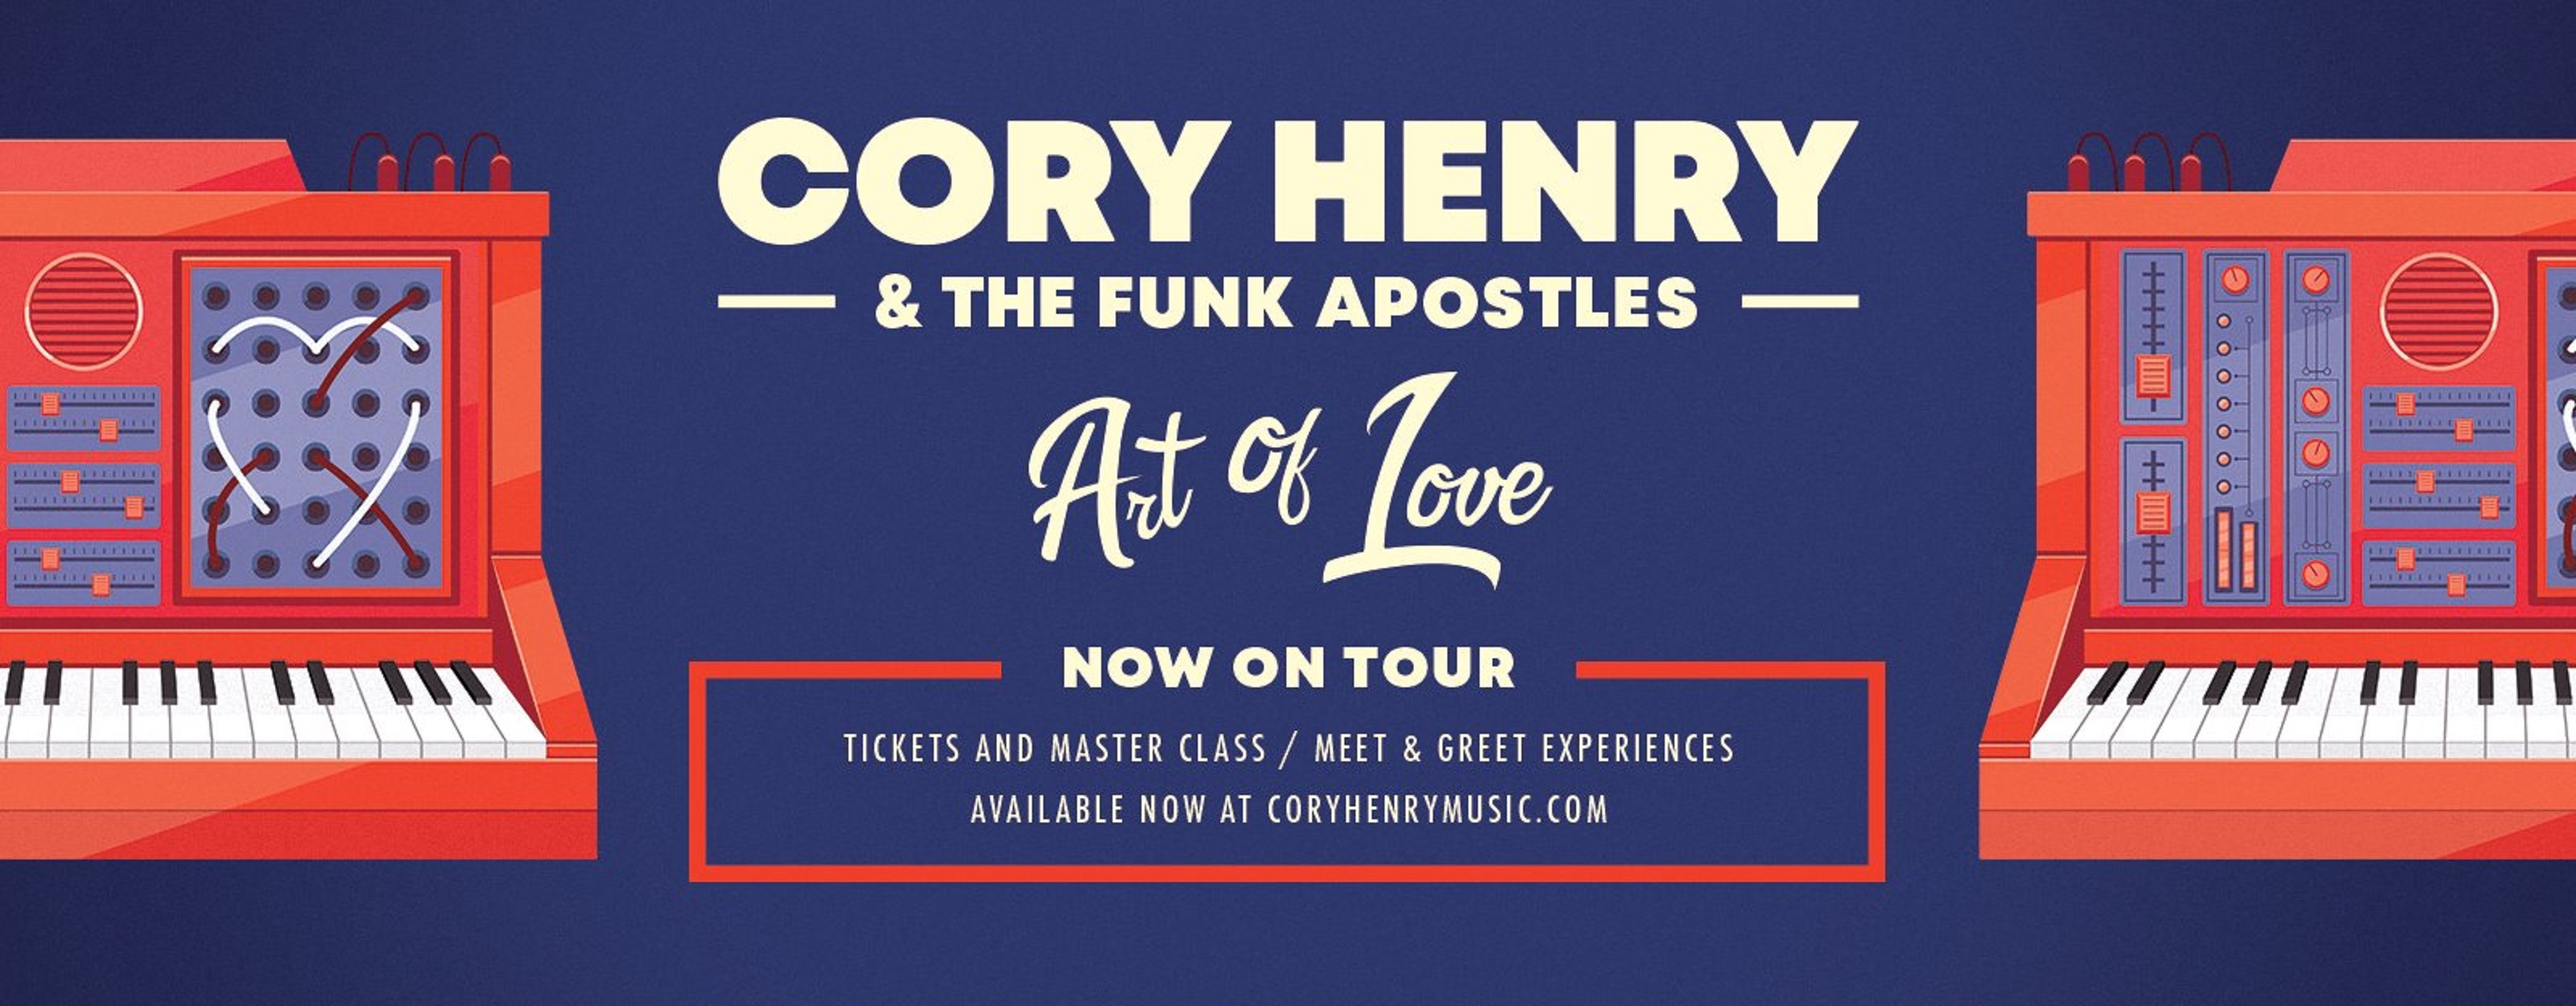 Cory Henry & The Funk Apostles Announce Fall Tour